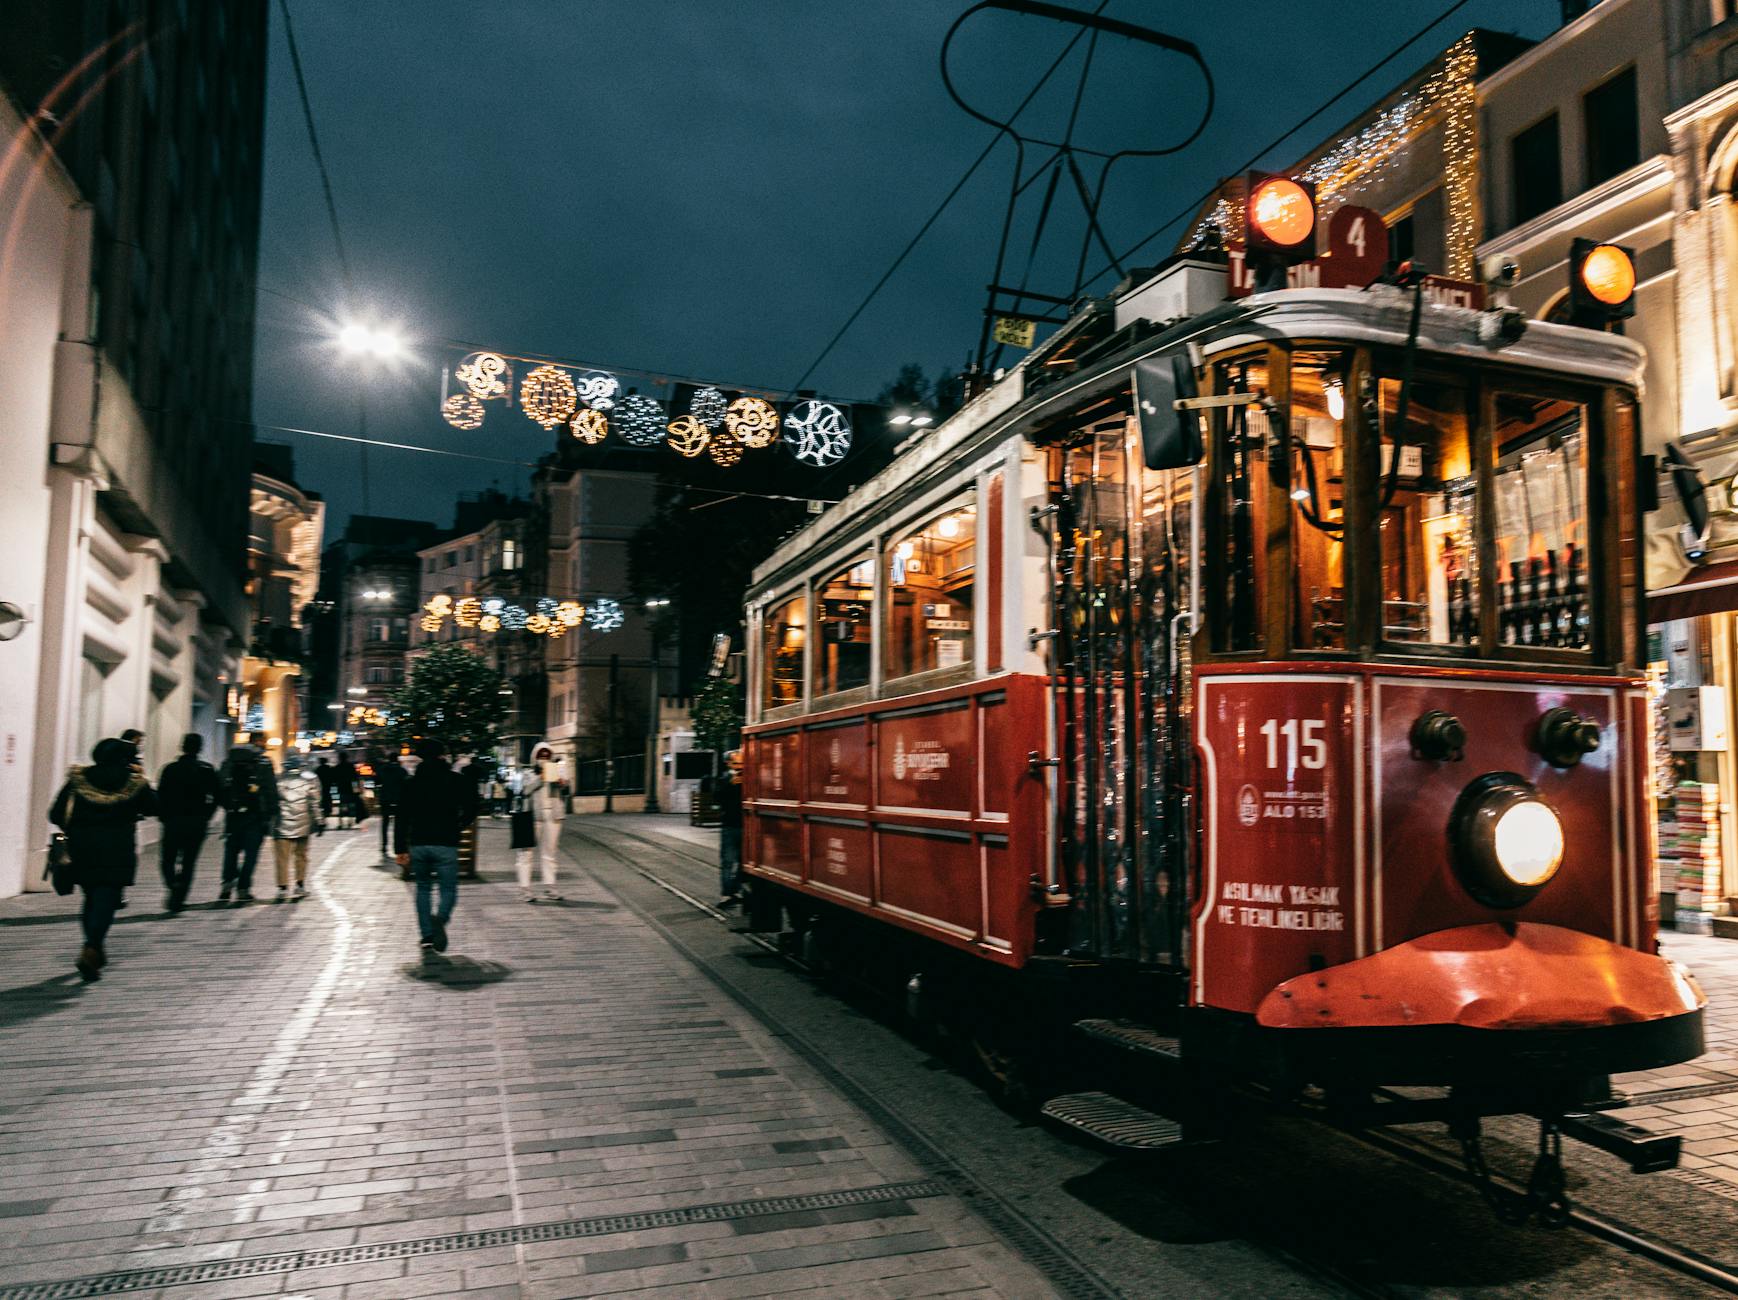 Old tram riding on railway of city decorated with garlands